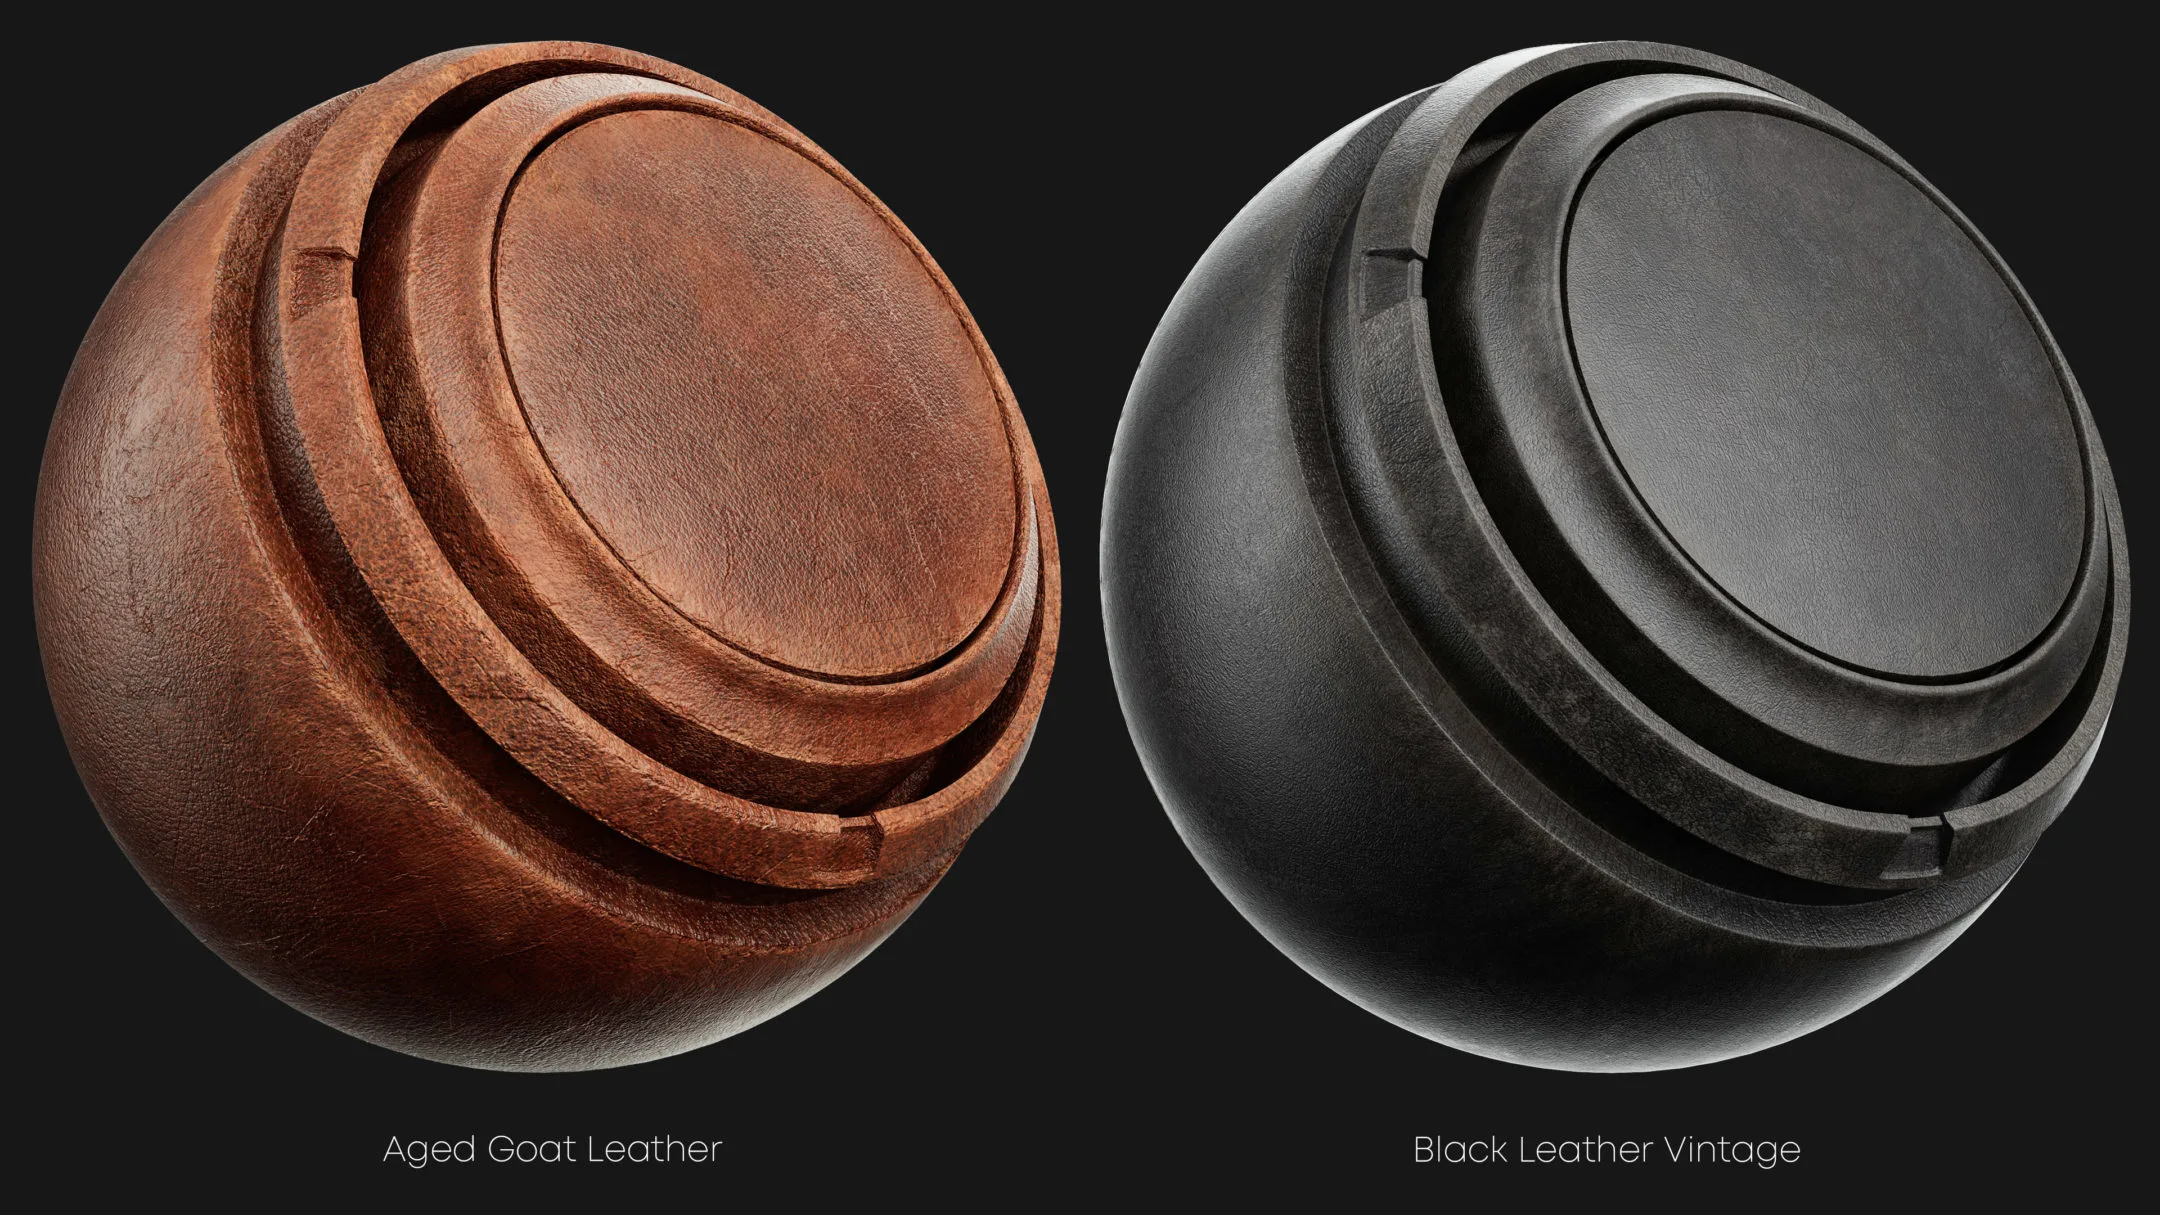 Leather Smart Materials for Substance painter VOL 02